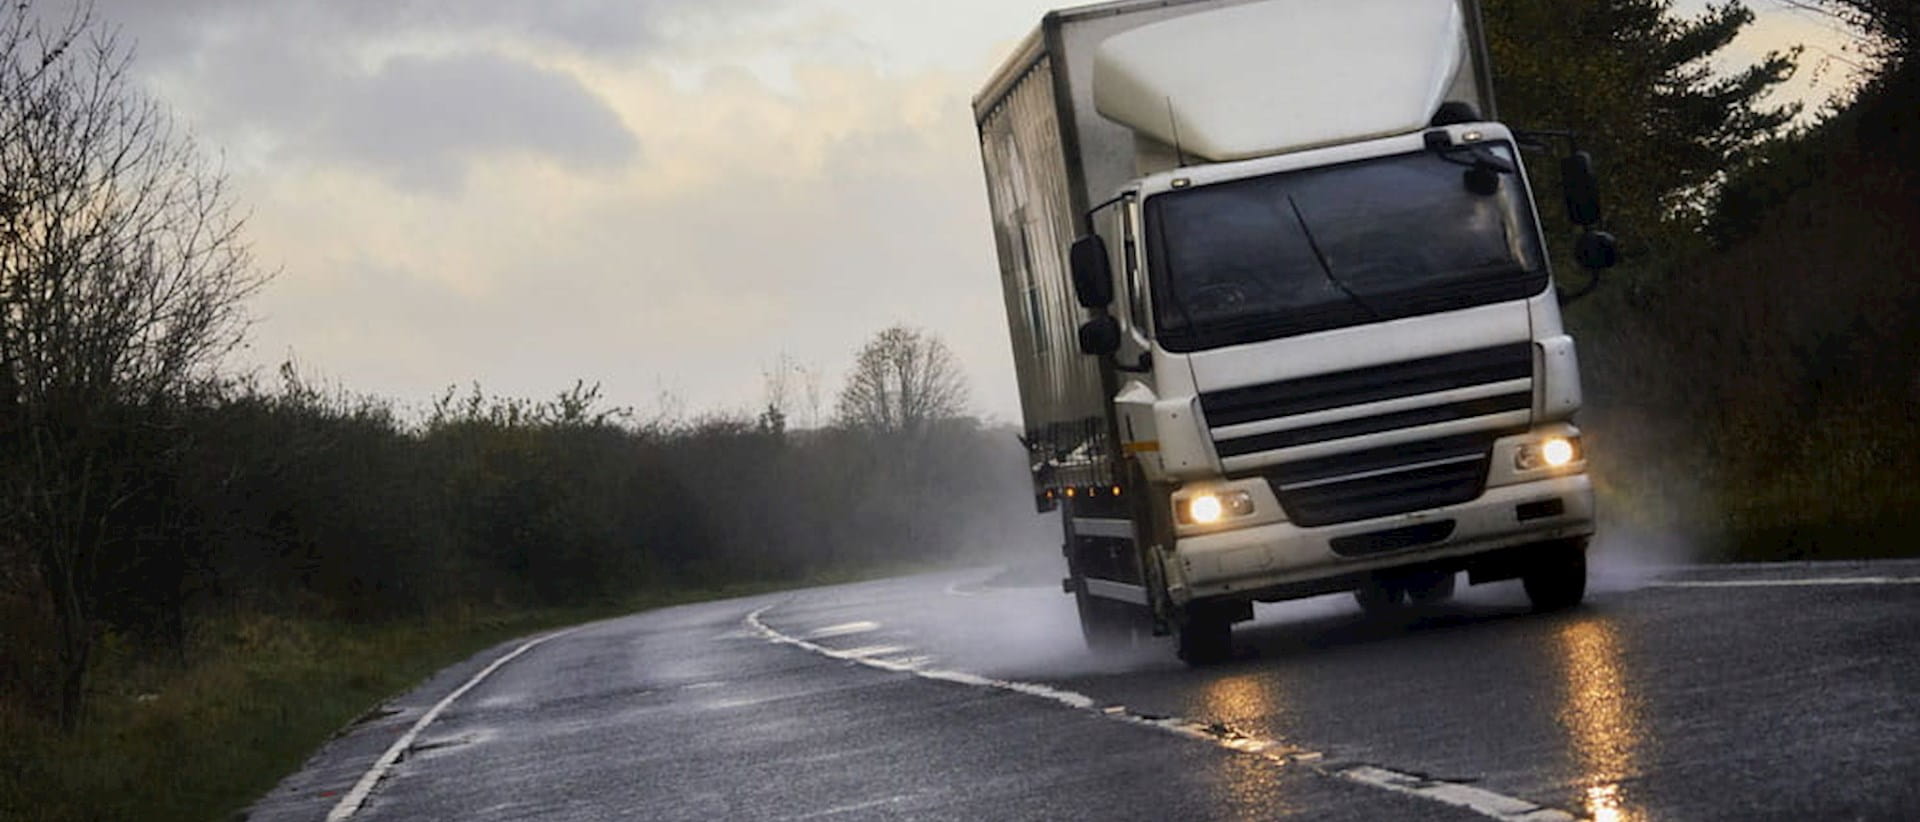 Lorry driving on wet road